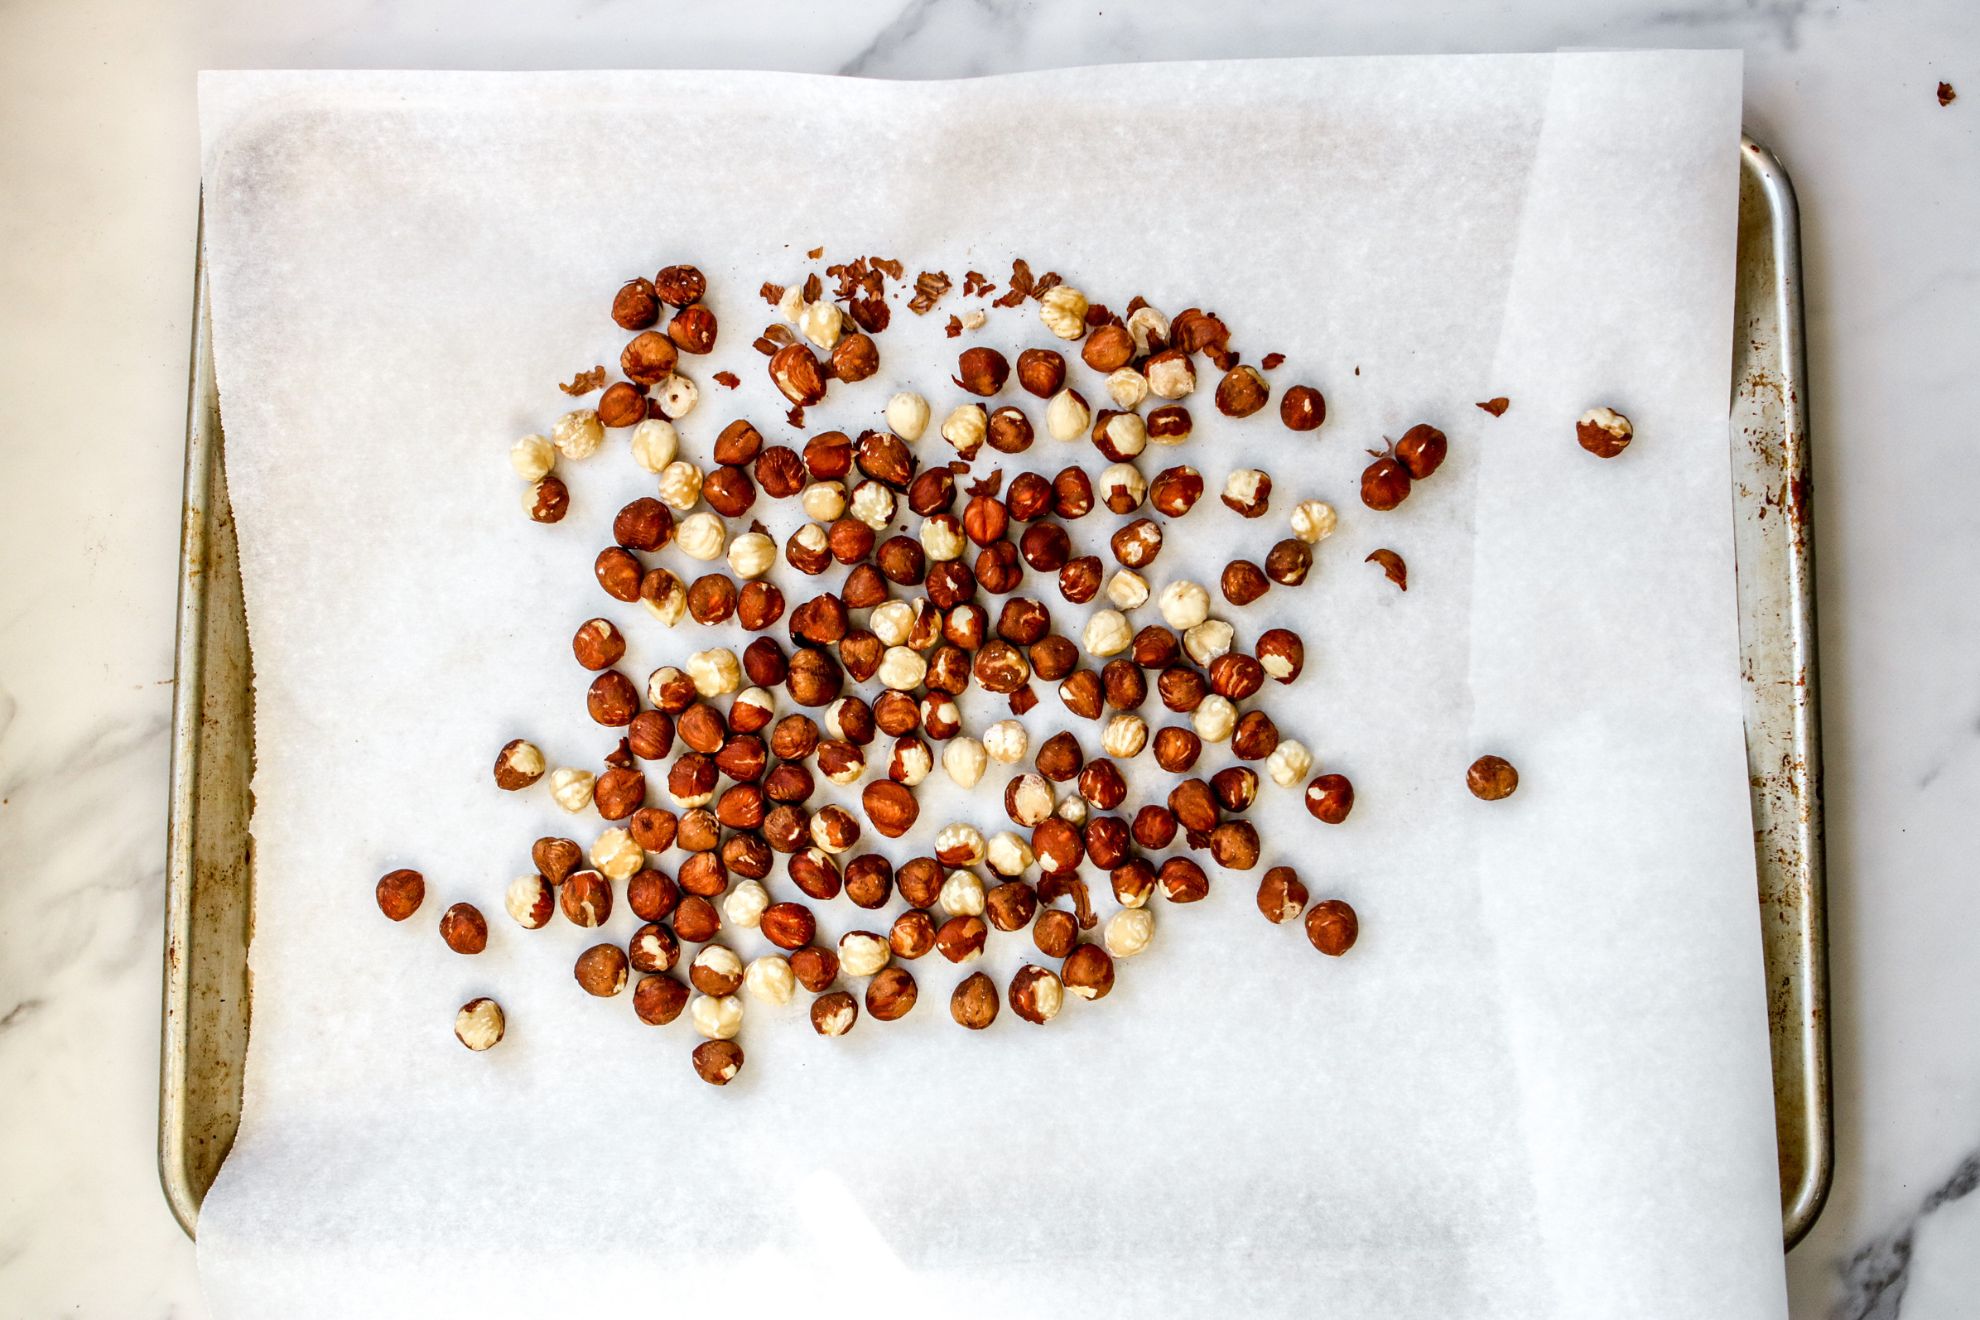 This is an overhead horizontal image of a baking sheet lined with parchment paper. On top of the parchment paper are hazelnuts with their skins on, spread out in an even layer. The baking sheet sits on a white marble counter. 